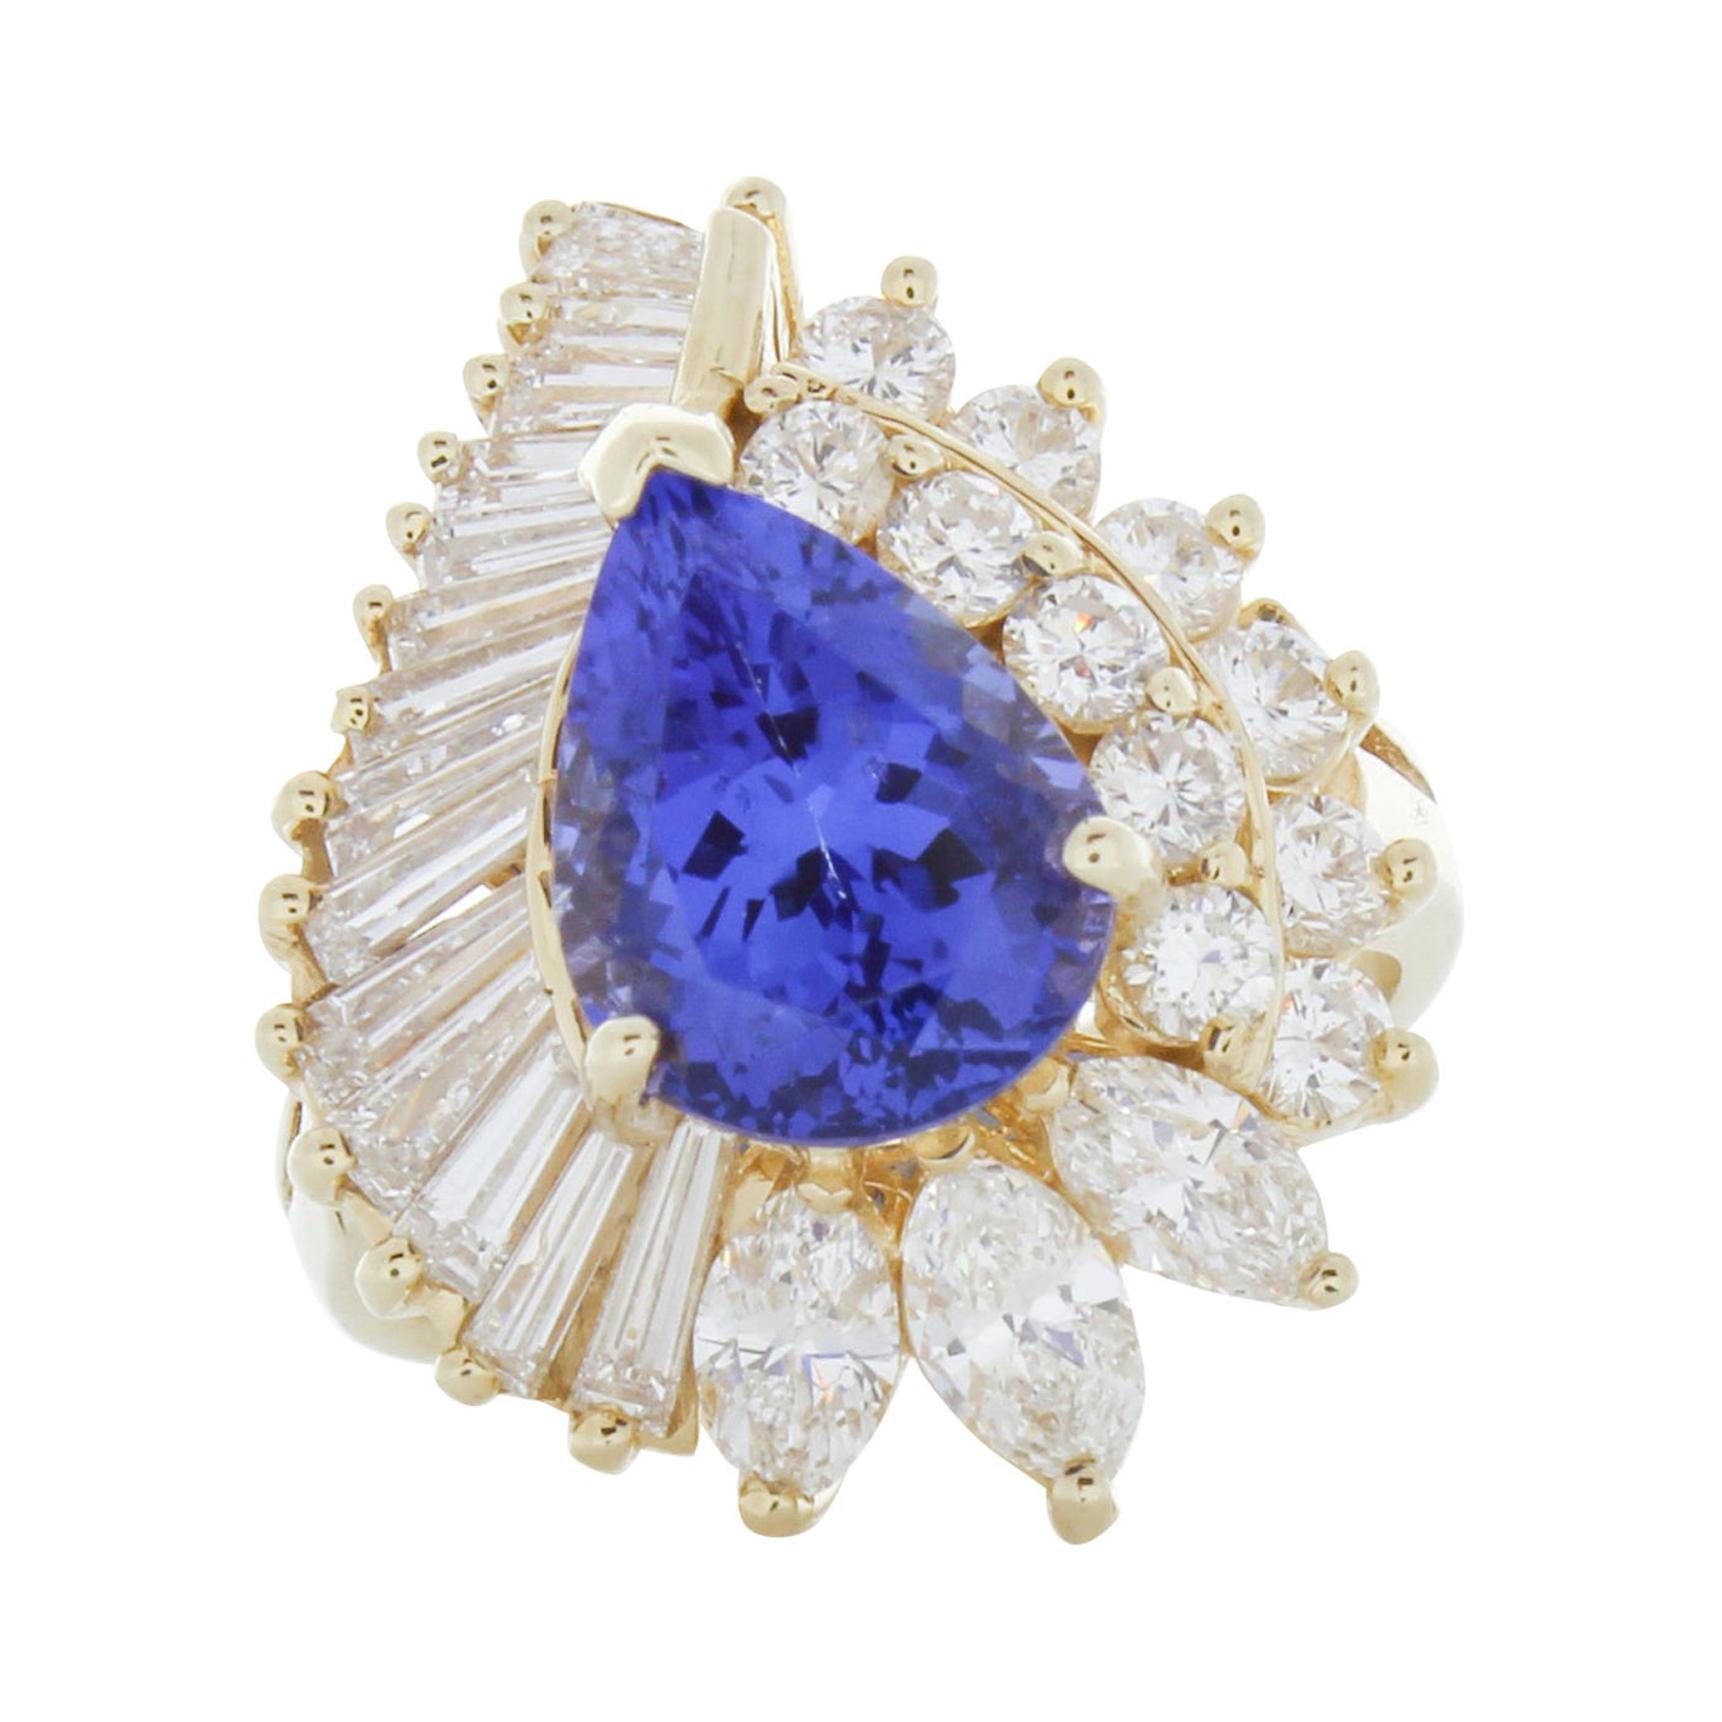 2.64 Carat Pear Shaped Tanzanite & Diamond Cocktail Ring in 14K Yellow Gold For Sale